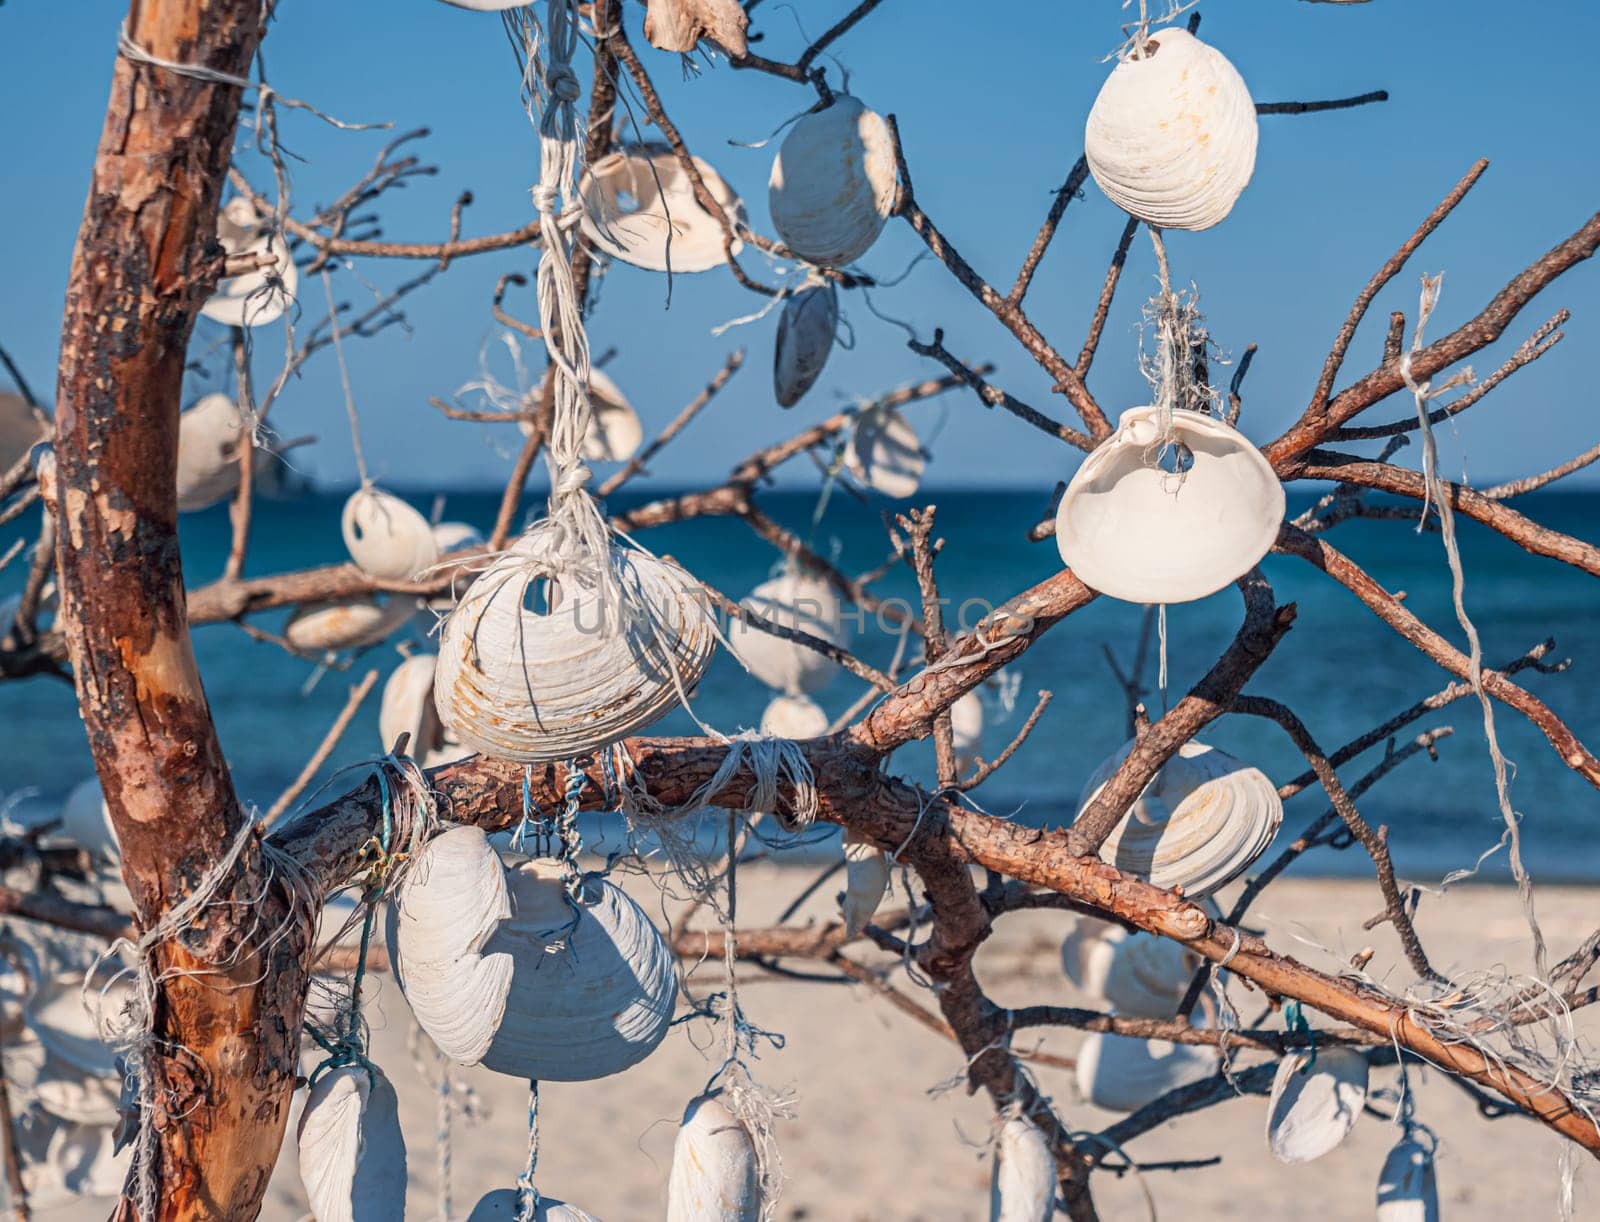 Handmade seashell decorations hanging on a driftwood tree at a beach during daytime by Busker